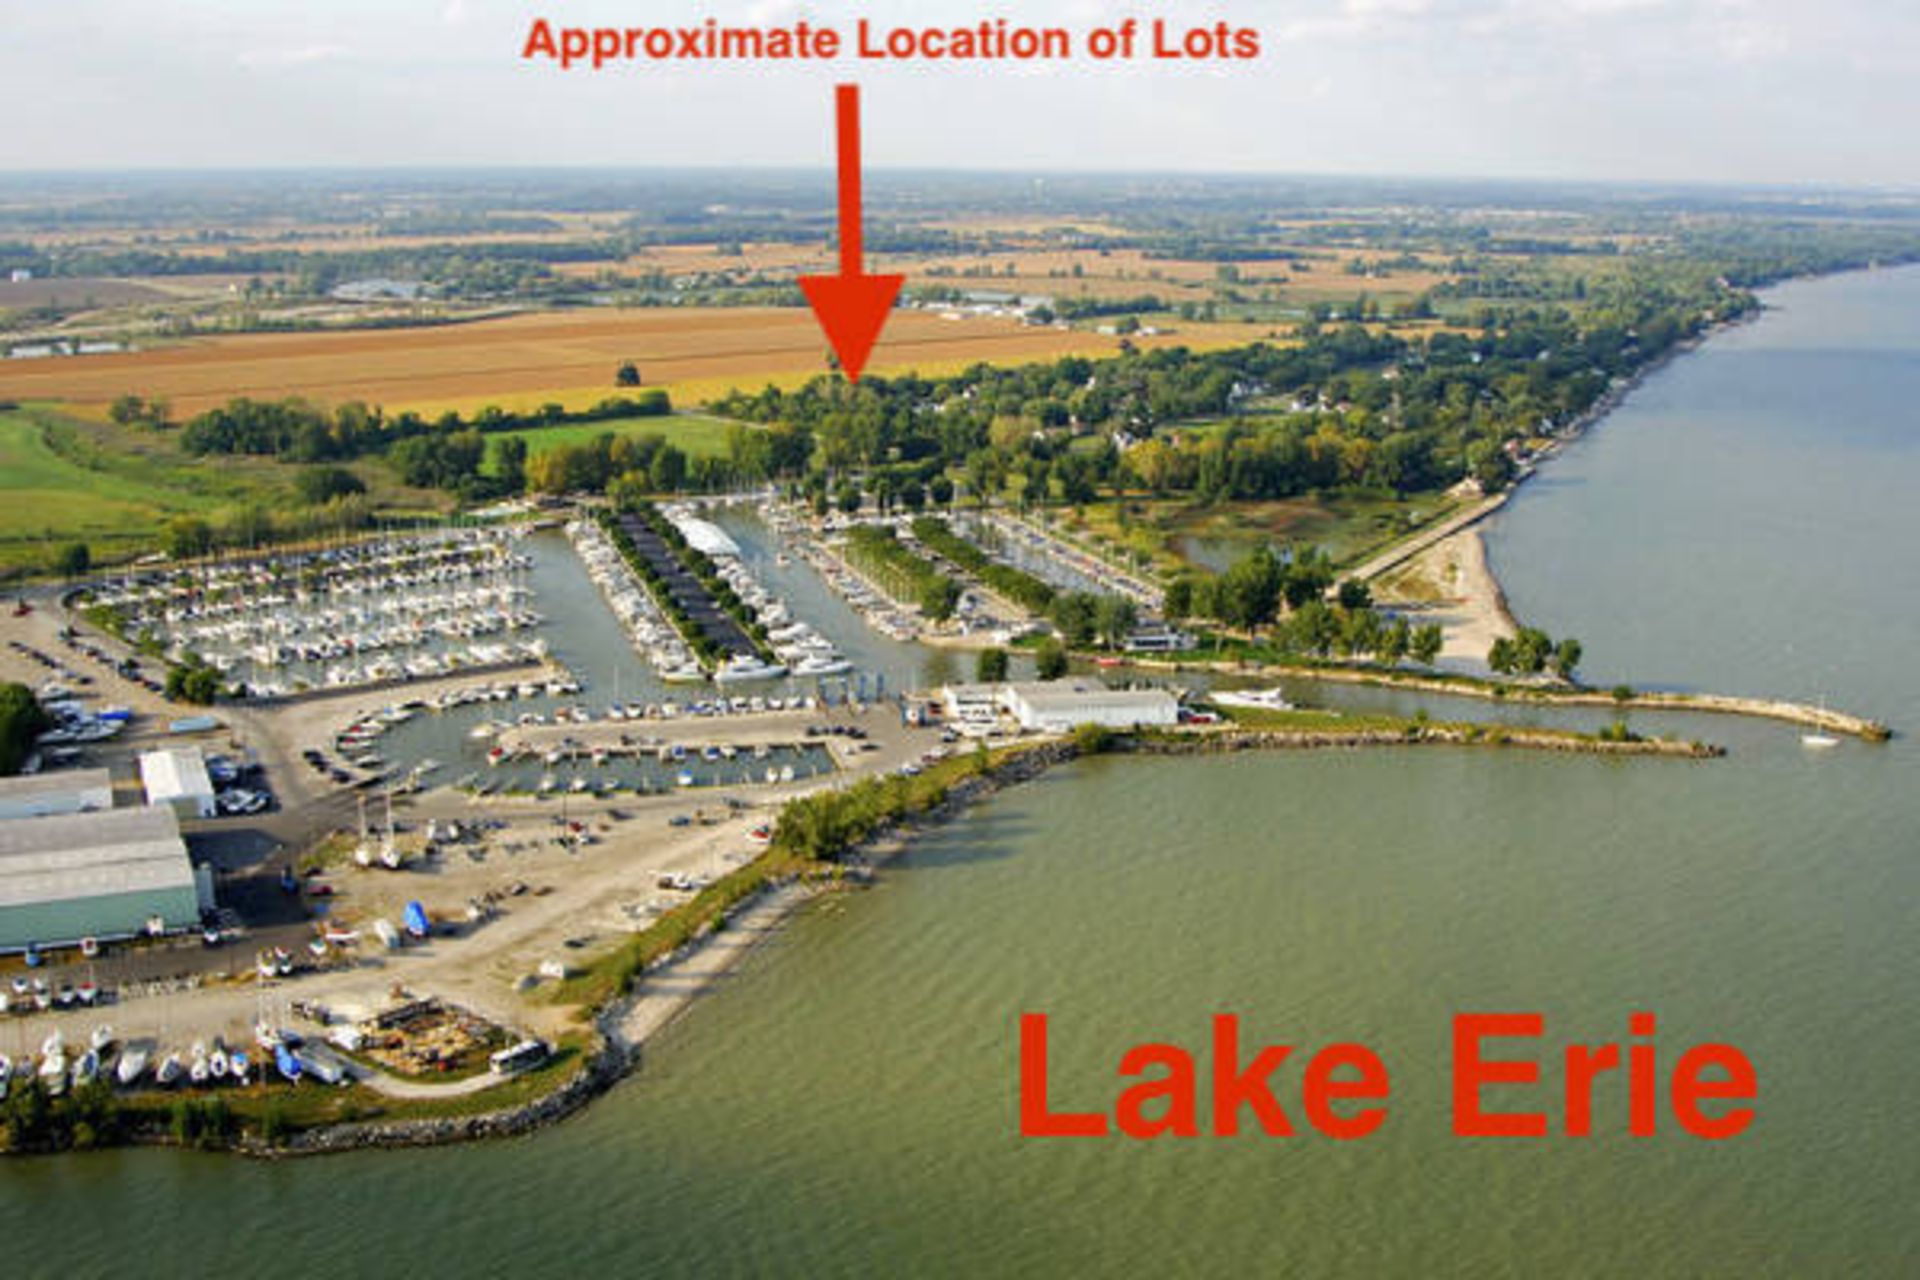 Short Stroll to Stunning Lake Erie in Michigan's Northern Shores Community! - Image 10 of 15